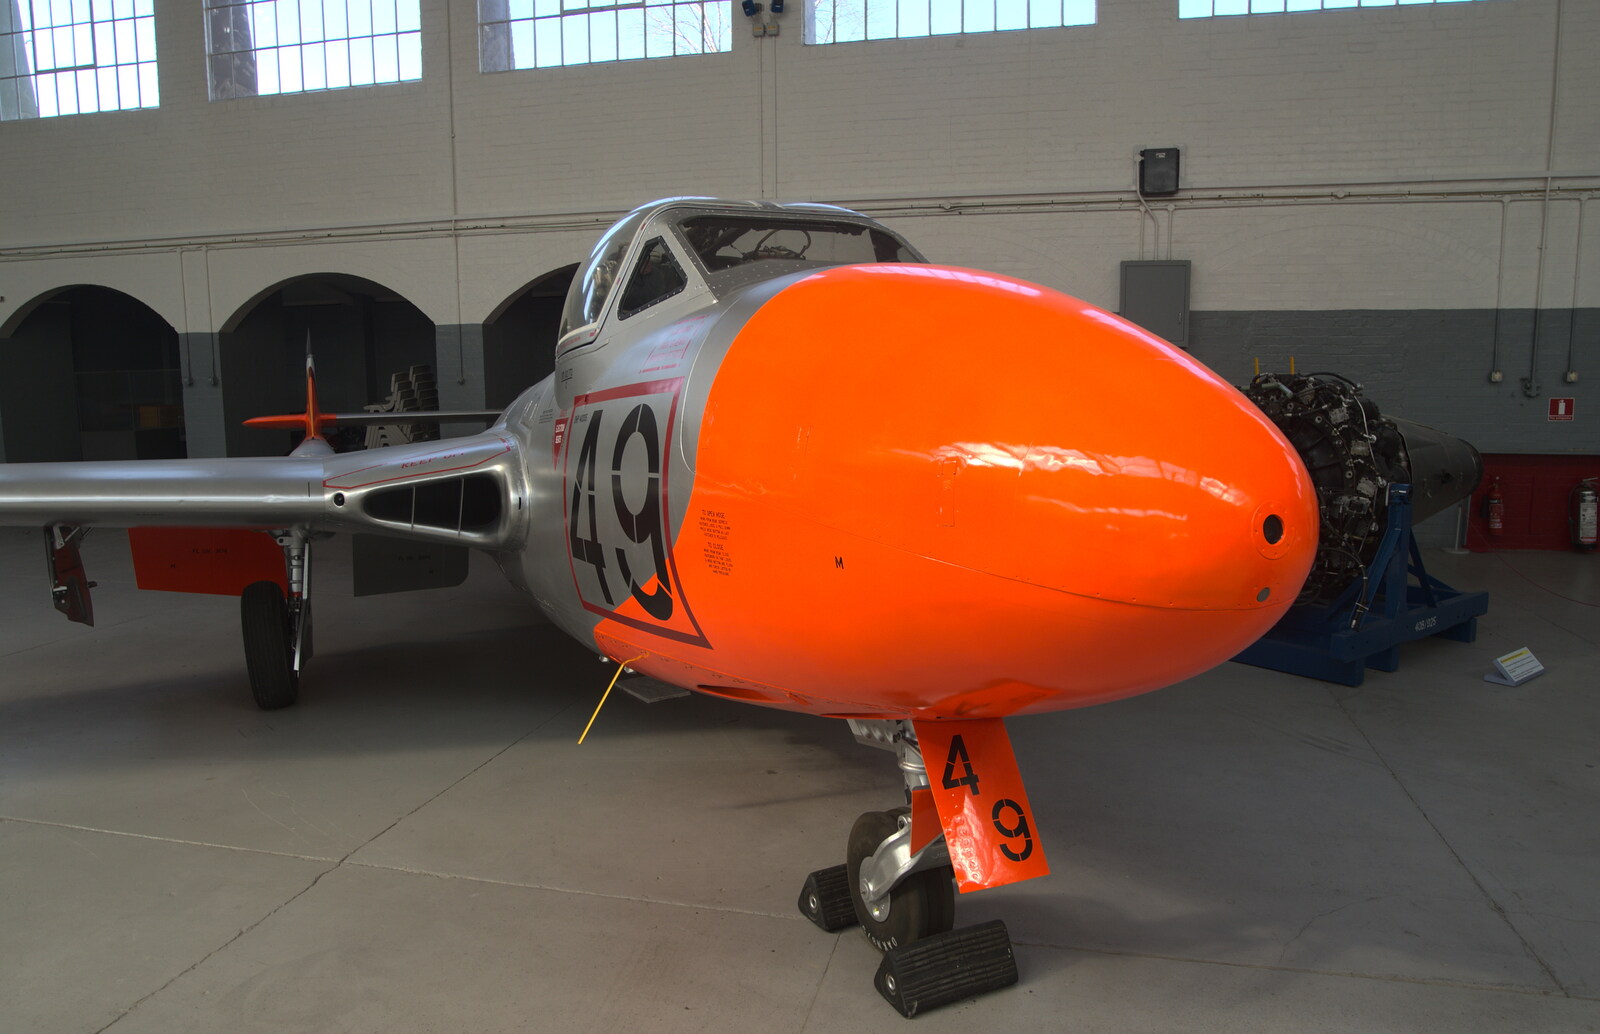 A very orange-nosed De Havilland Vampire Trainer from A Day Out at Duxford, Cambridgeshire - 9th March 2014